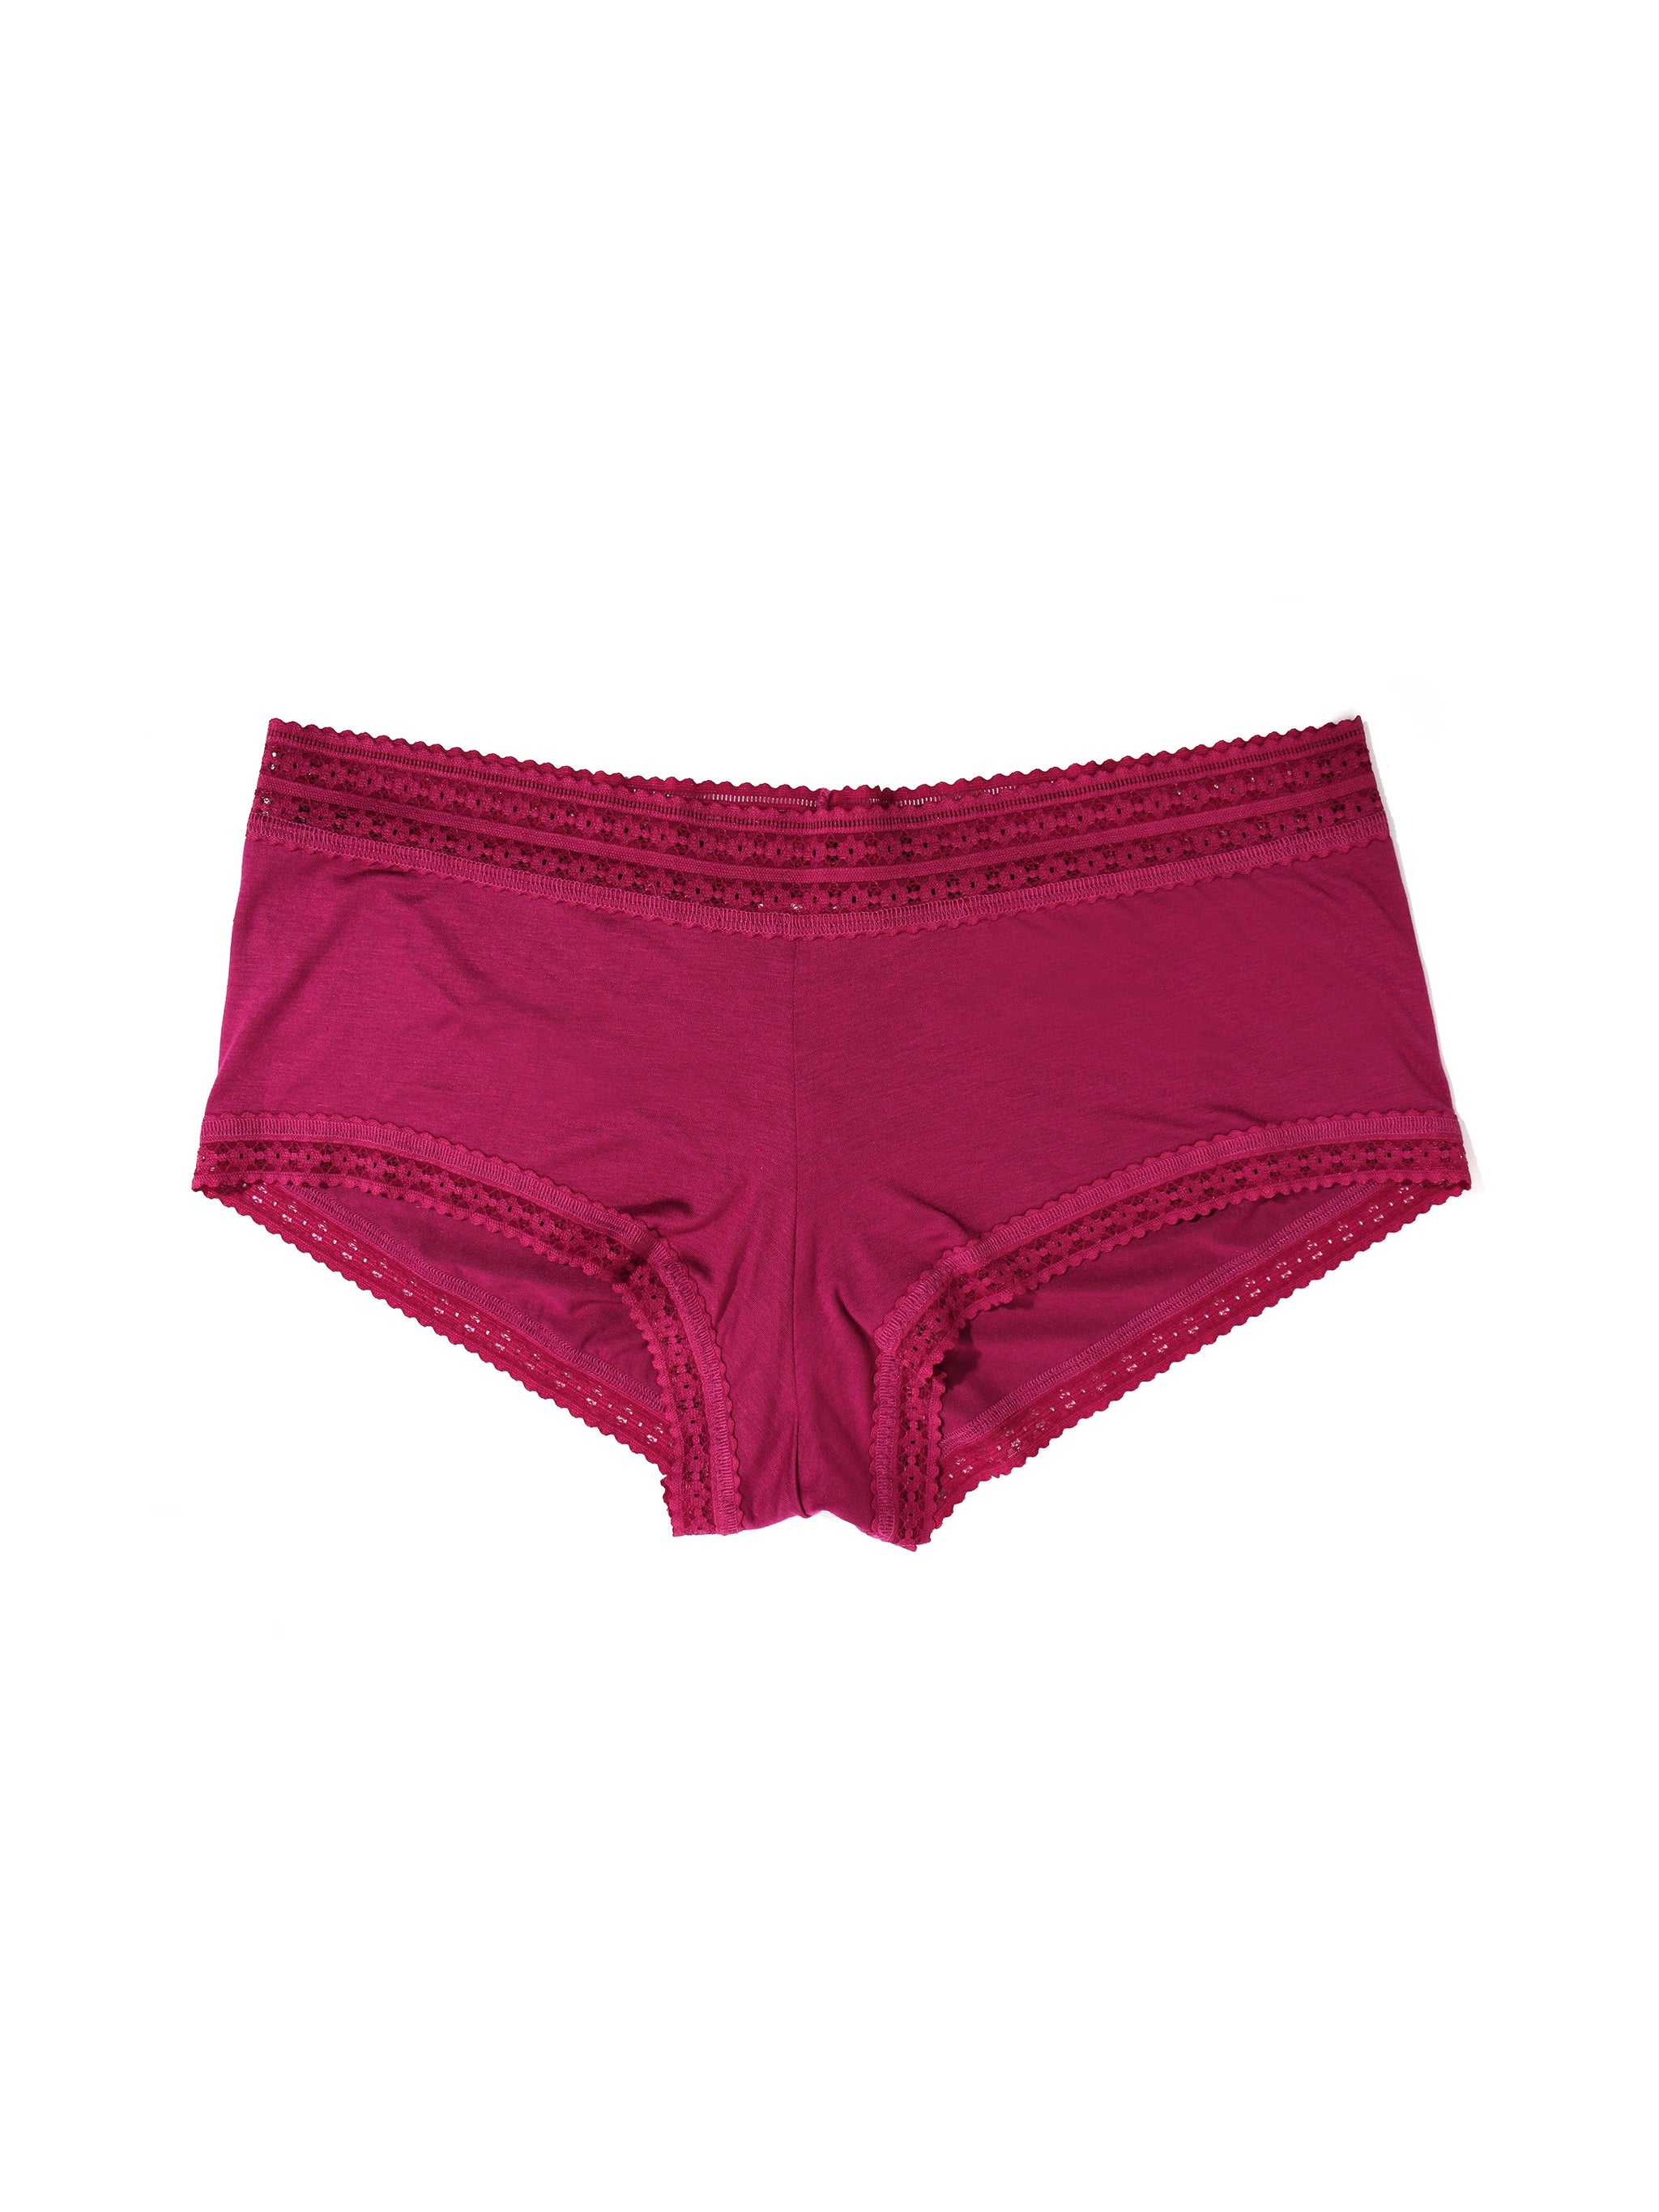 Plus Size Lace Boyshorts & Lace Hipster Panties Set Sexy Hipster Cheeky  Underwear For Women 6 Pack From Ardenen, $37.34